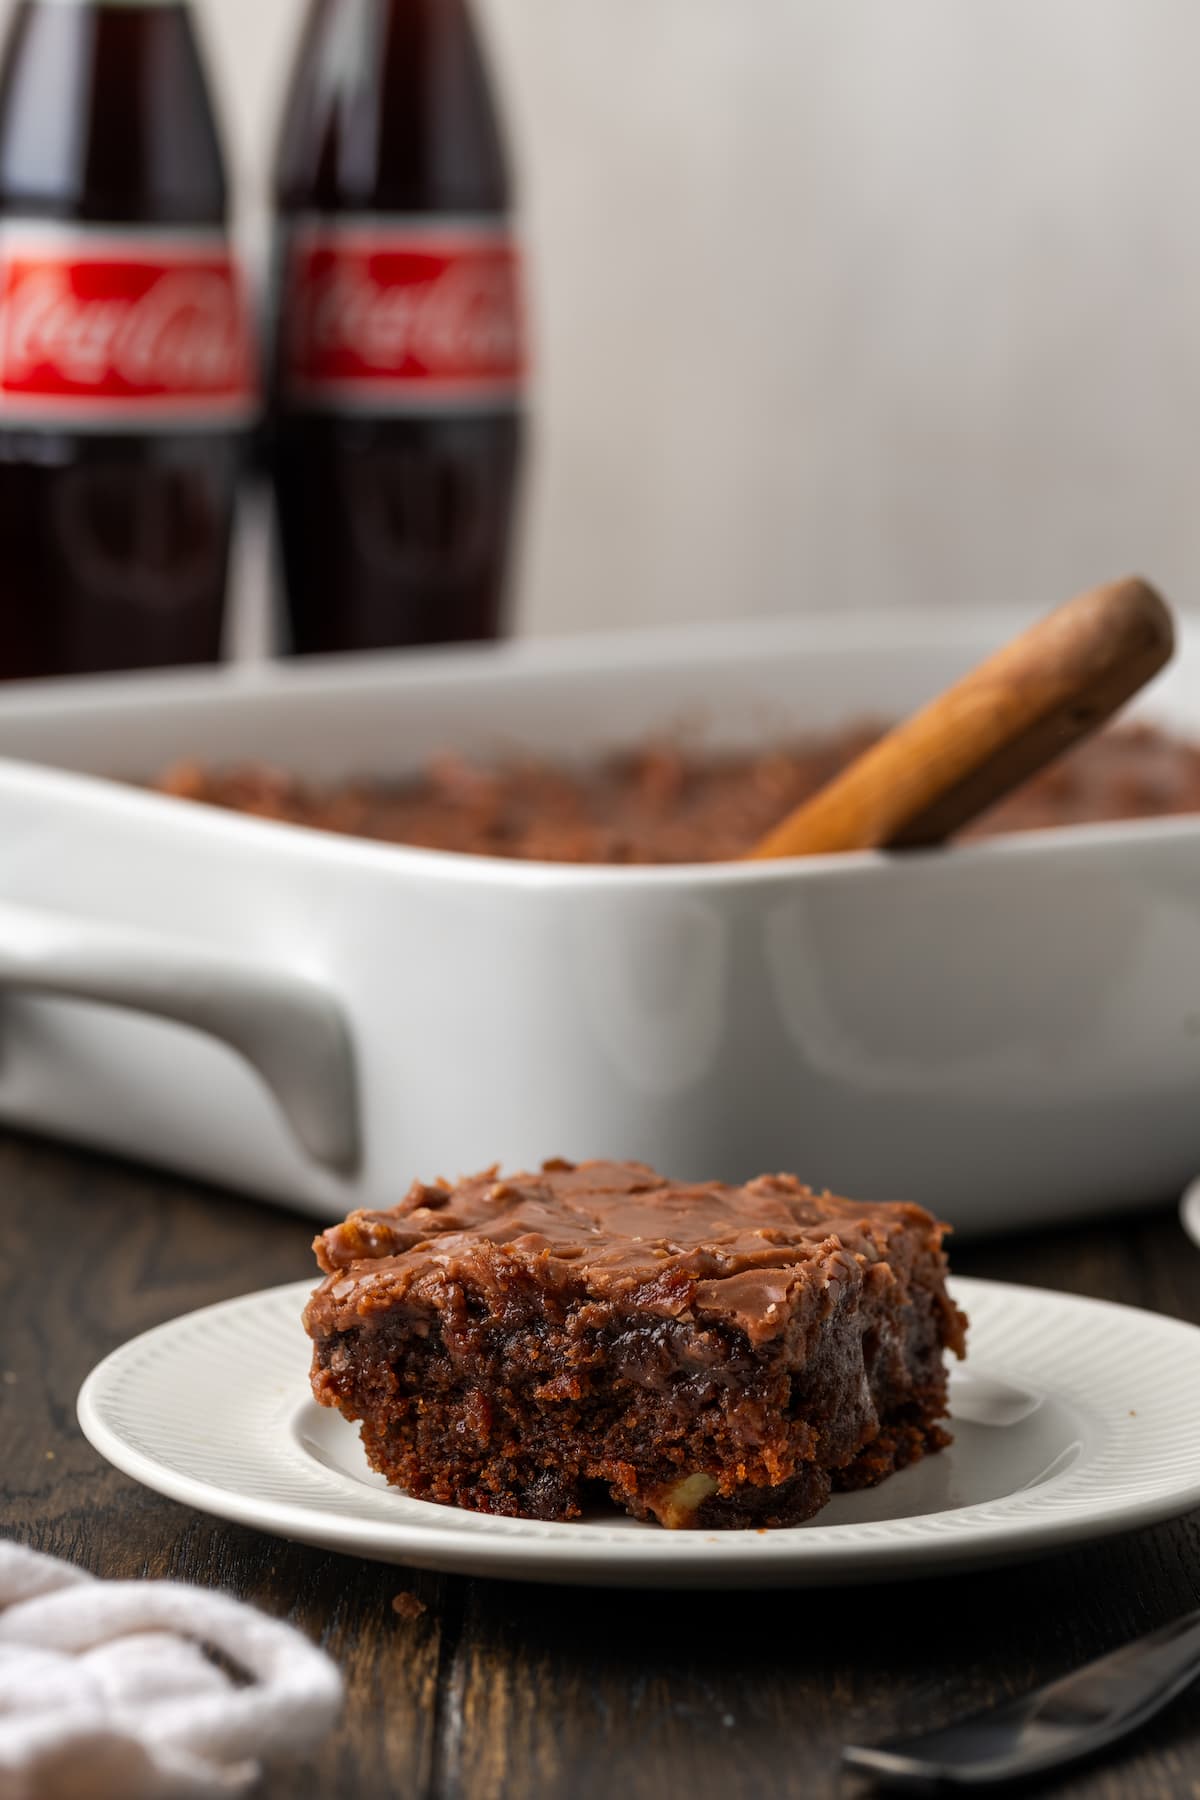 A slice of Coca Cola cake on a white plate, with the rest of the cake in a baking dish next to two Coke bottles in the background.